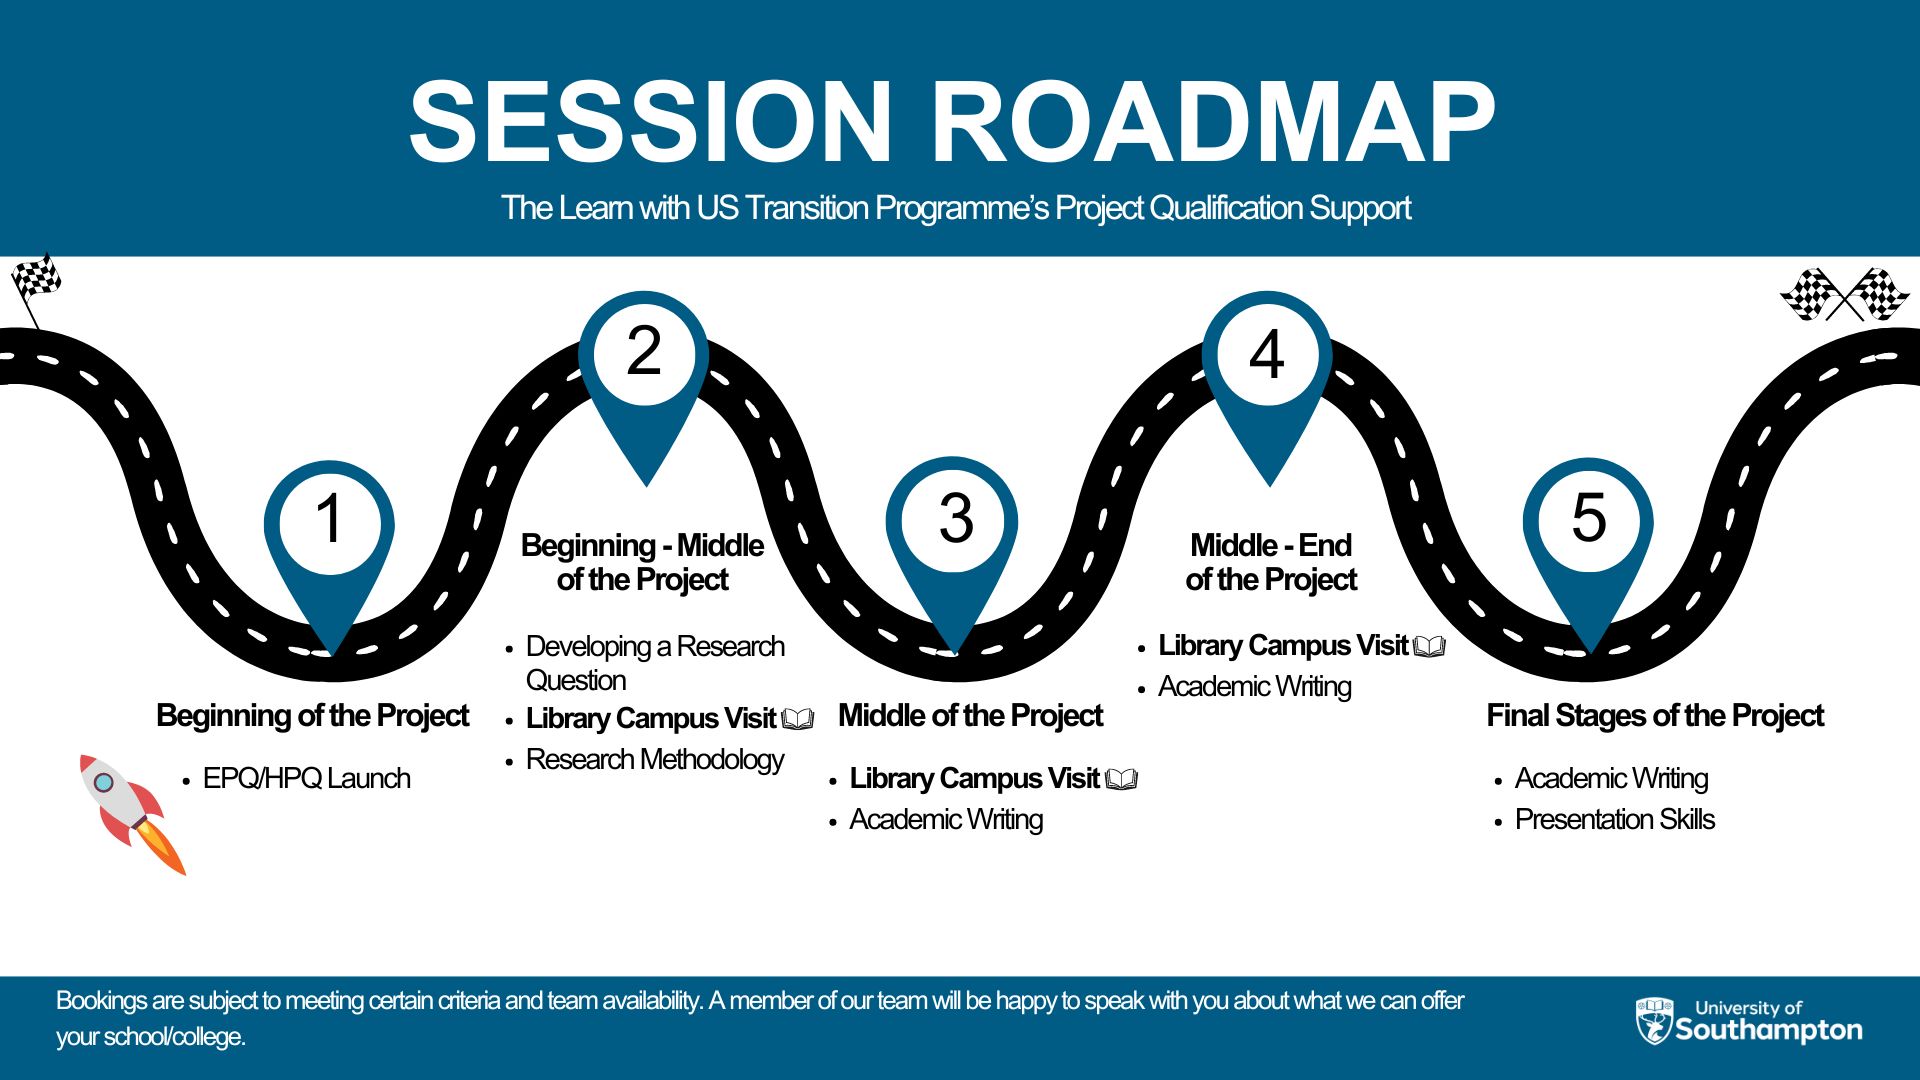 infographic depicting the appropriate and approximate timings for each session.